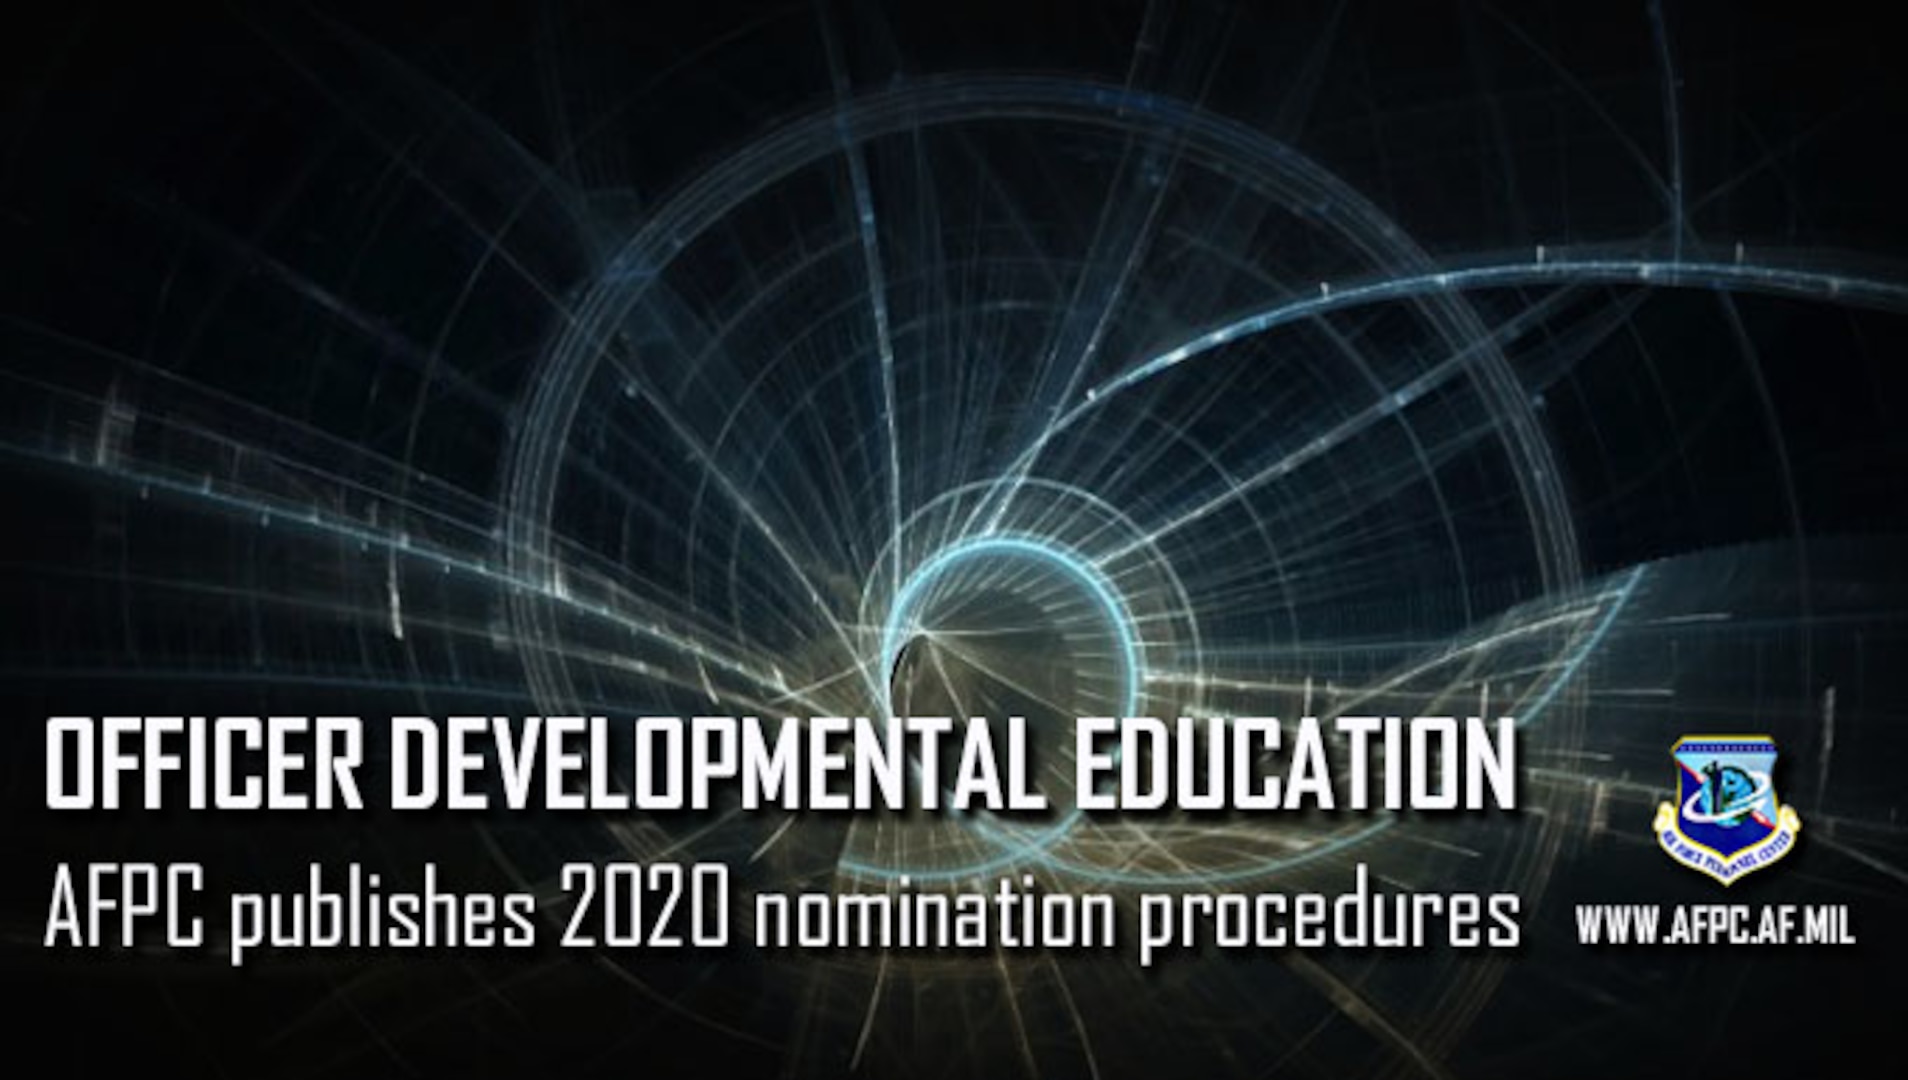 Graphic with news lead information for Air Force 2020 officer developmental education procedures